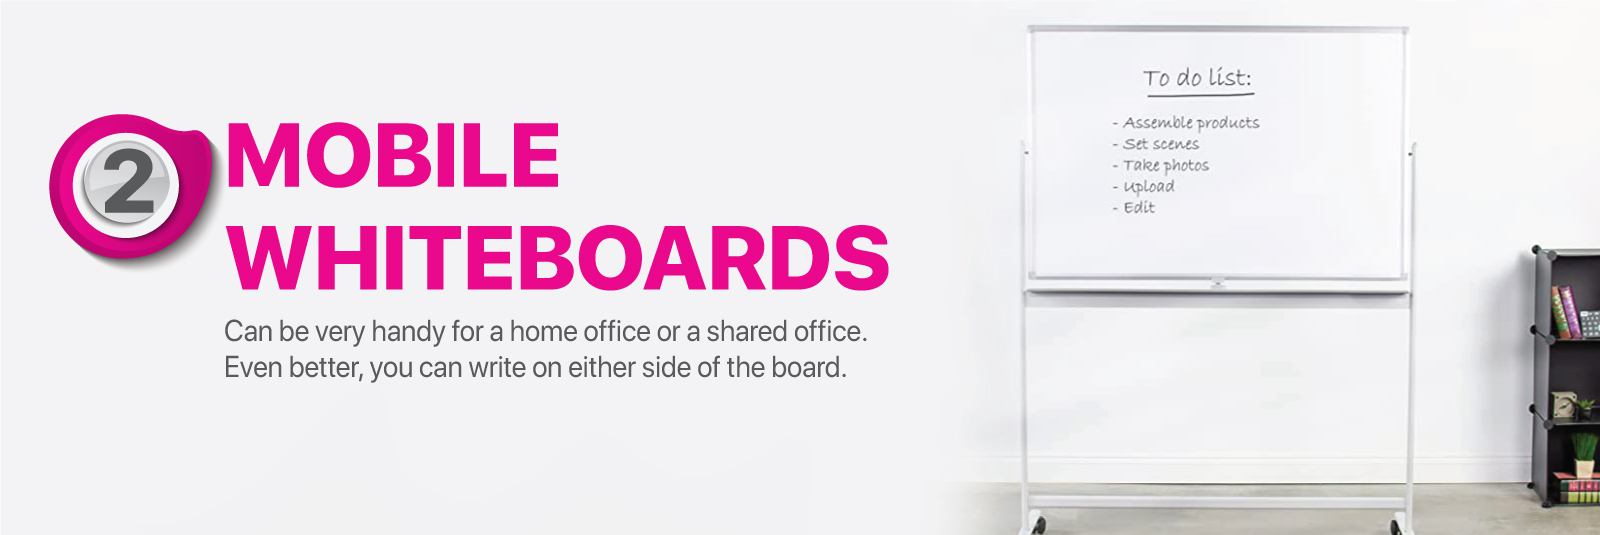 Mobile Whiteboard can be very handy for a home office or a shared office. even better, you can write on either side of the board.